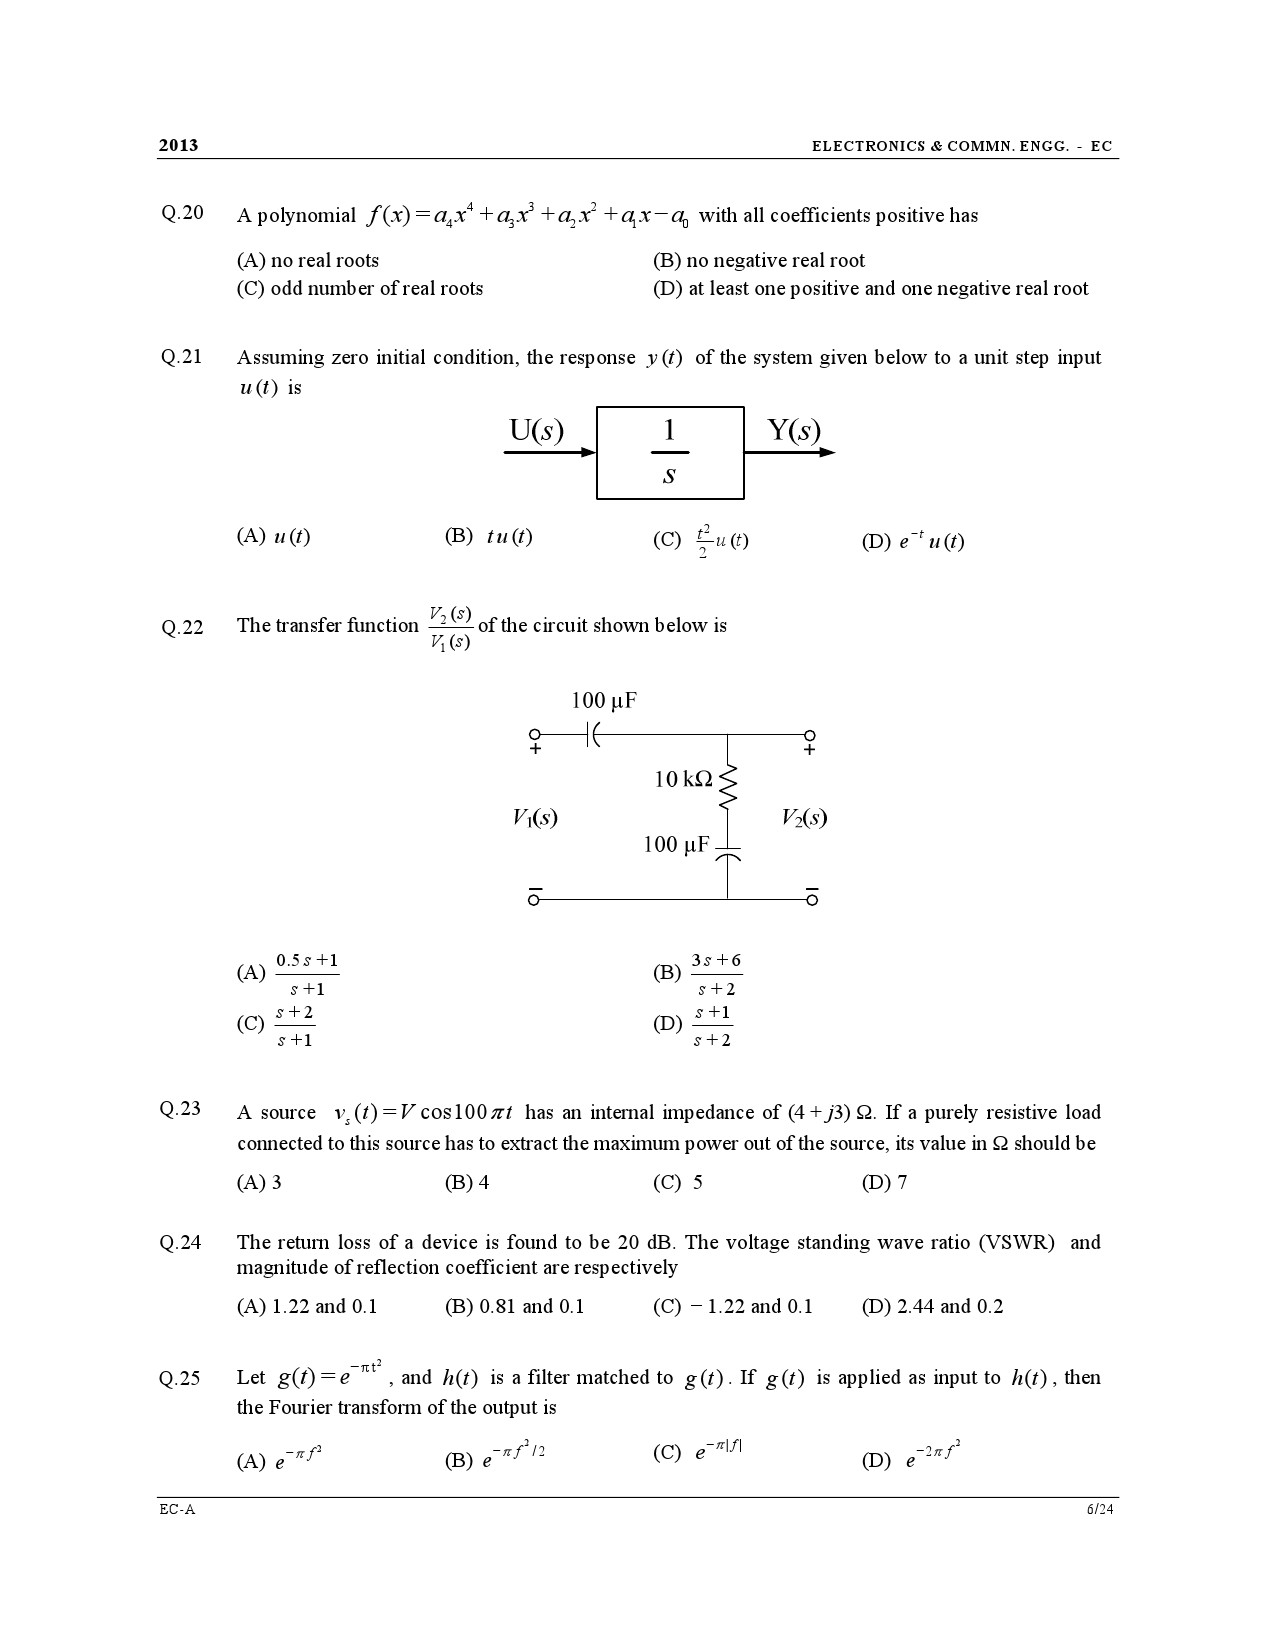 GATE Exam Question Paper 2013 Electronics and Communication Engineering 6